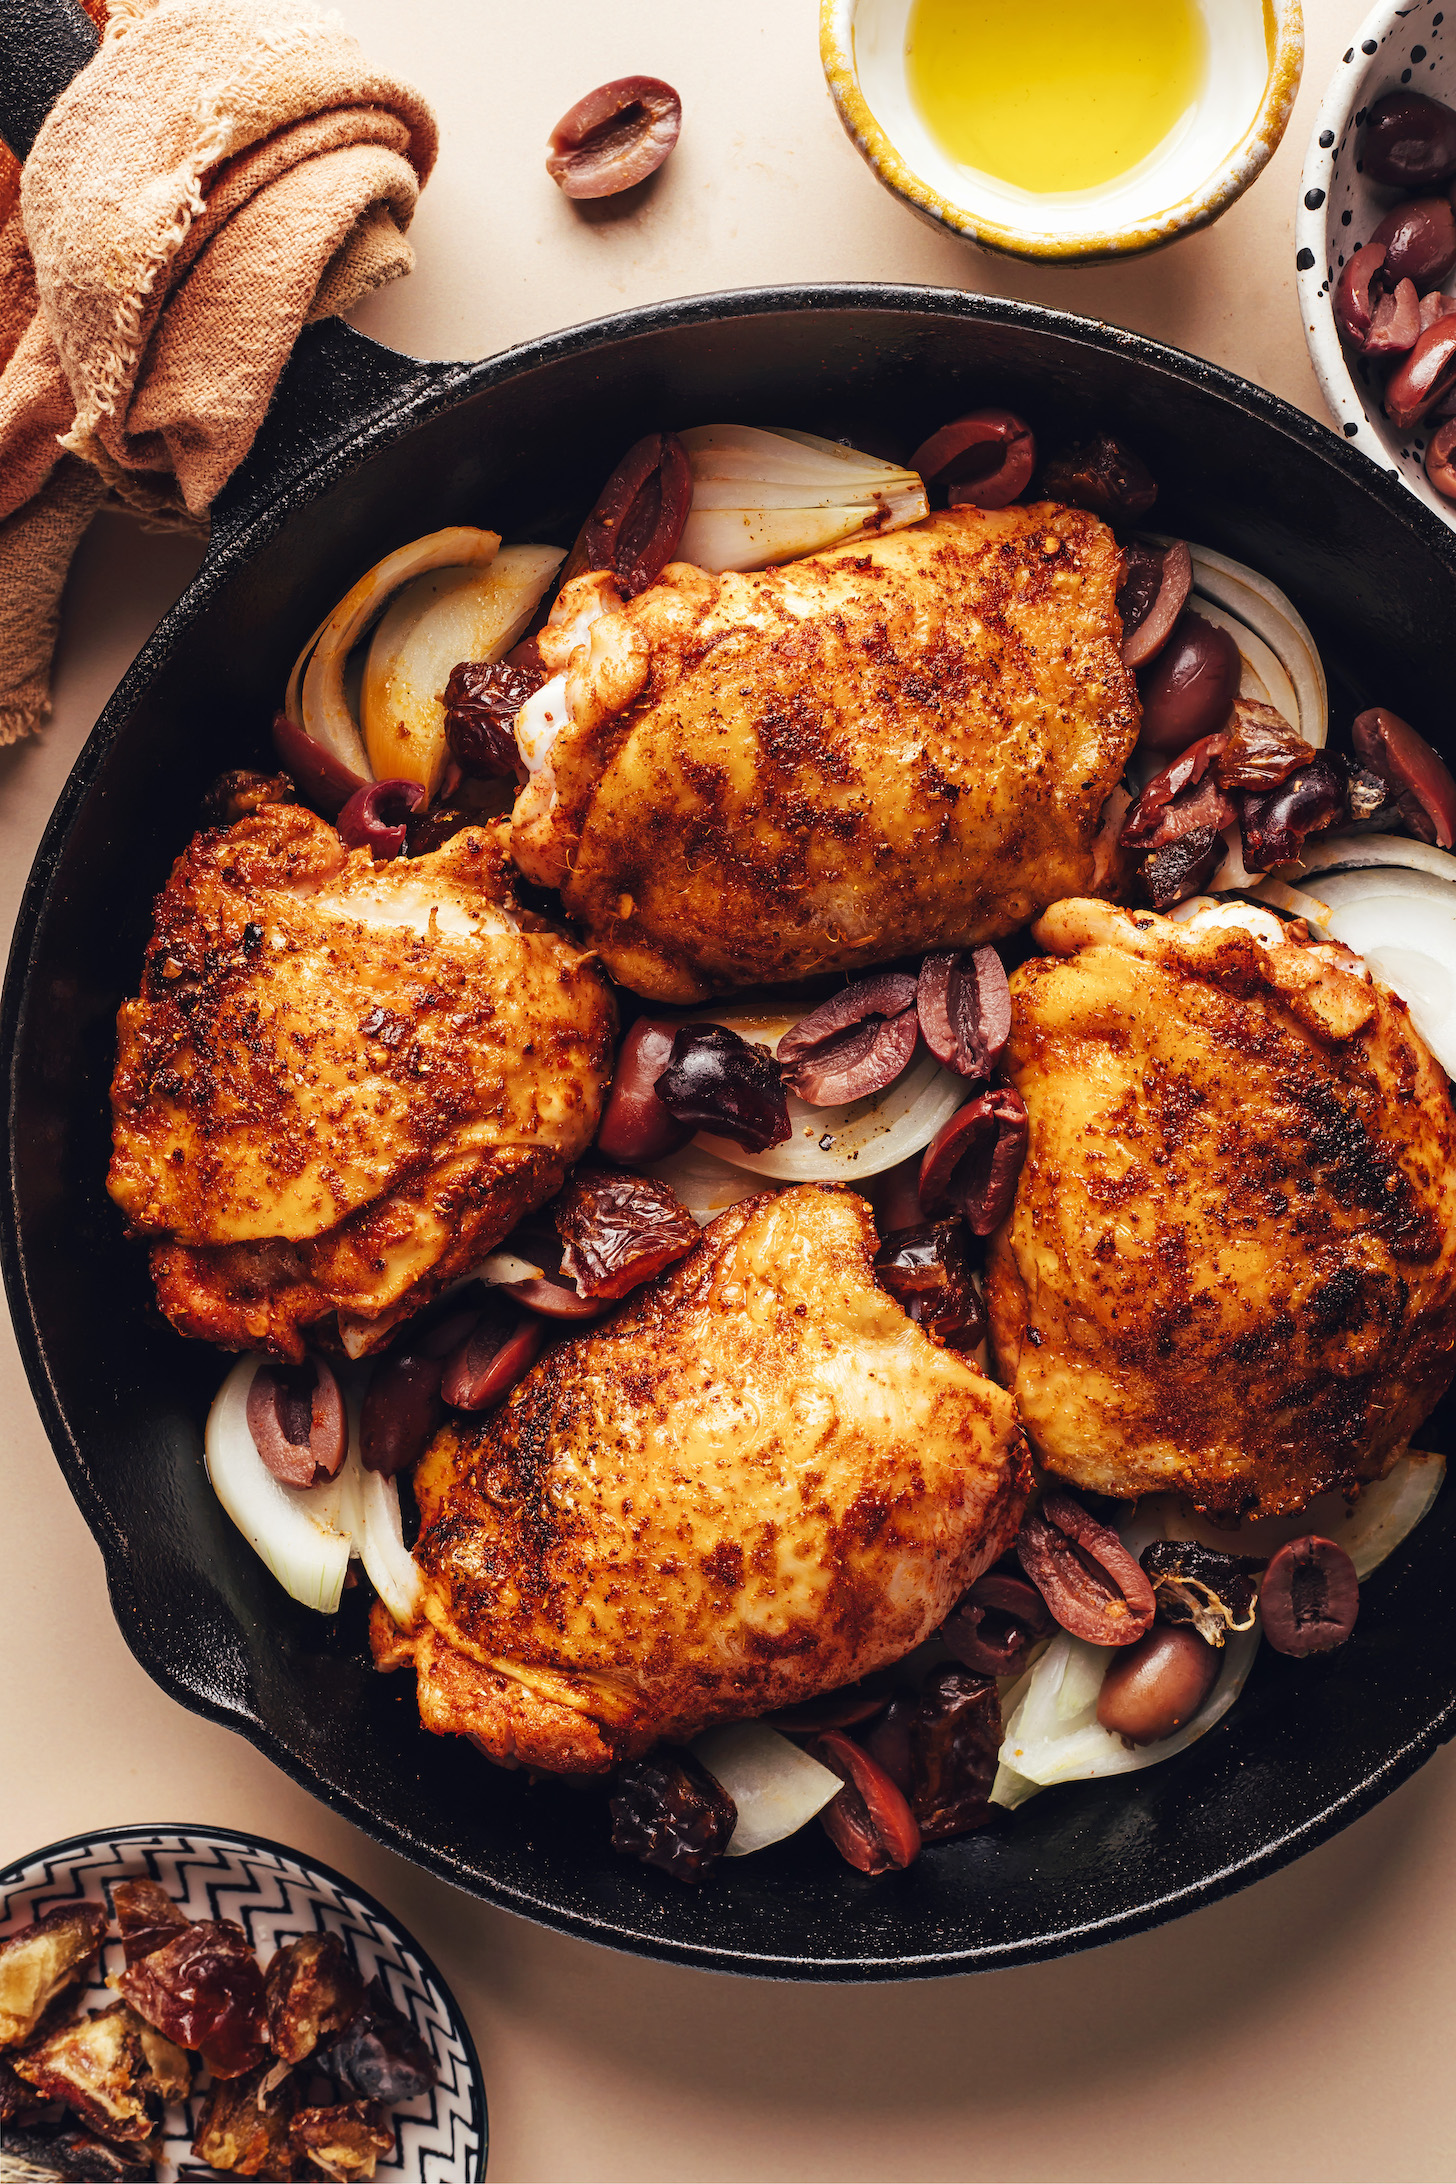 Kalamata olives and onions surrounding crispy pan seared chicken thighs in a cast iron skillet